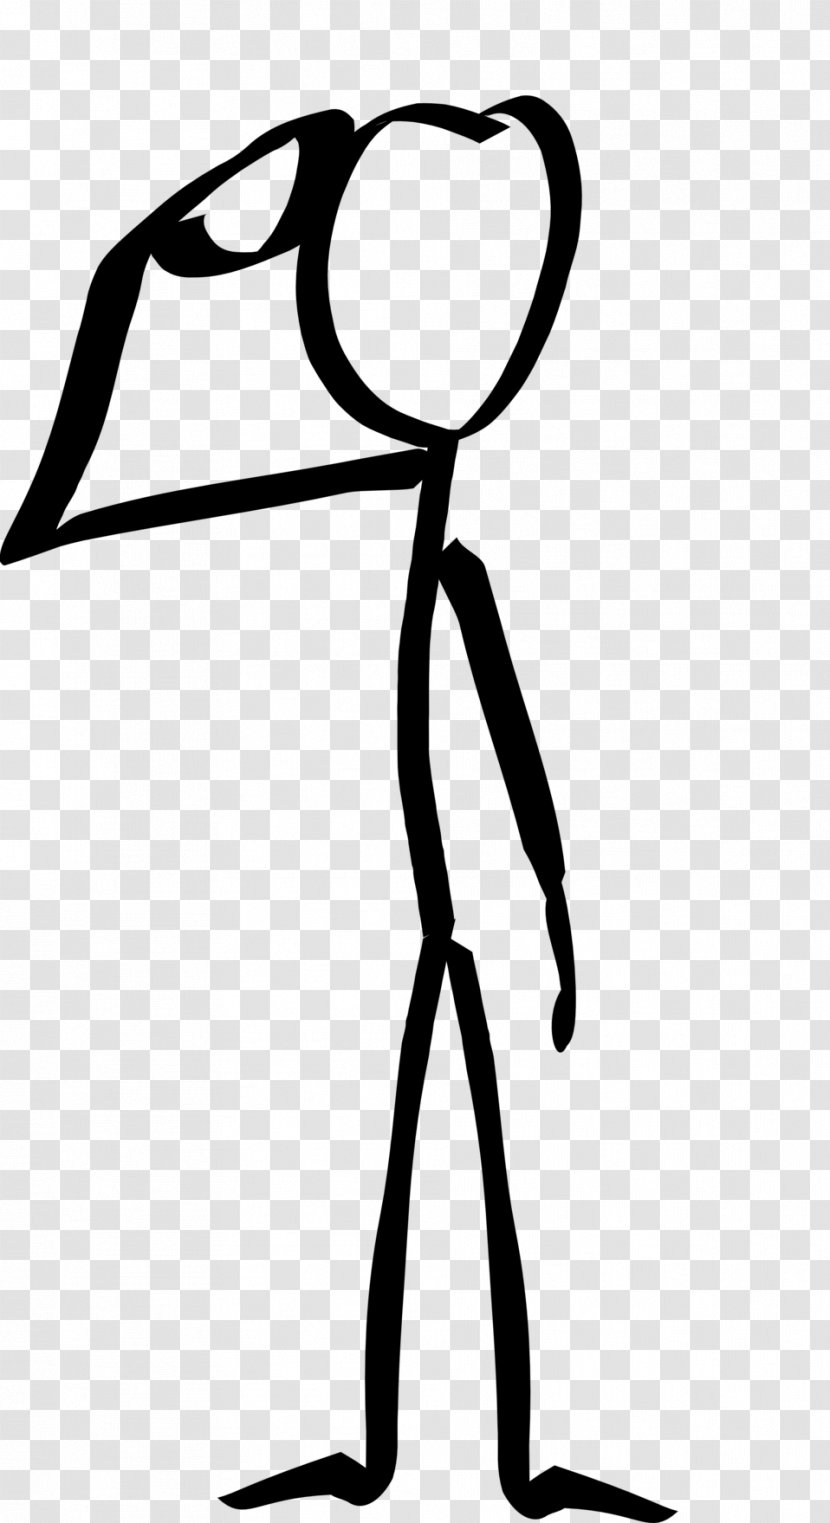 Drawing Soldier Salute Stick Figure Clip Art - Military Transparent PNG